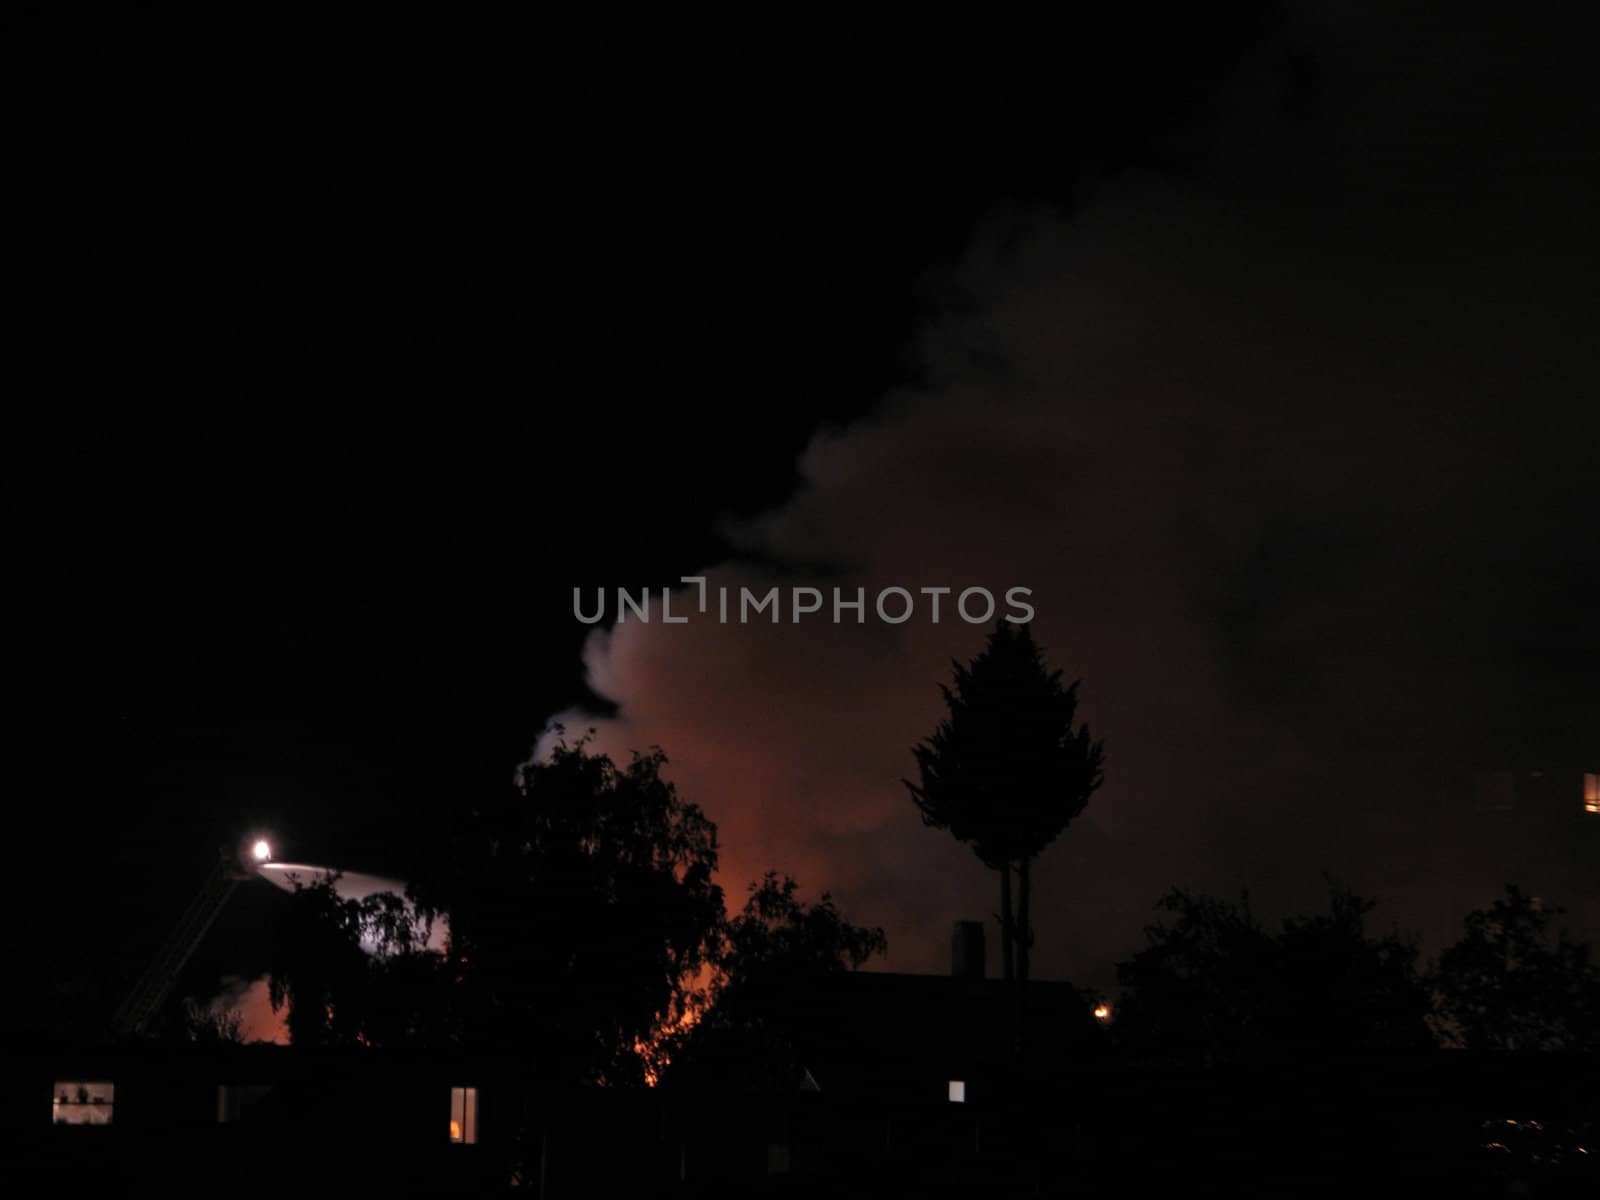 large fire in the night by mmm